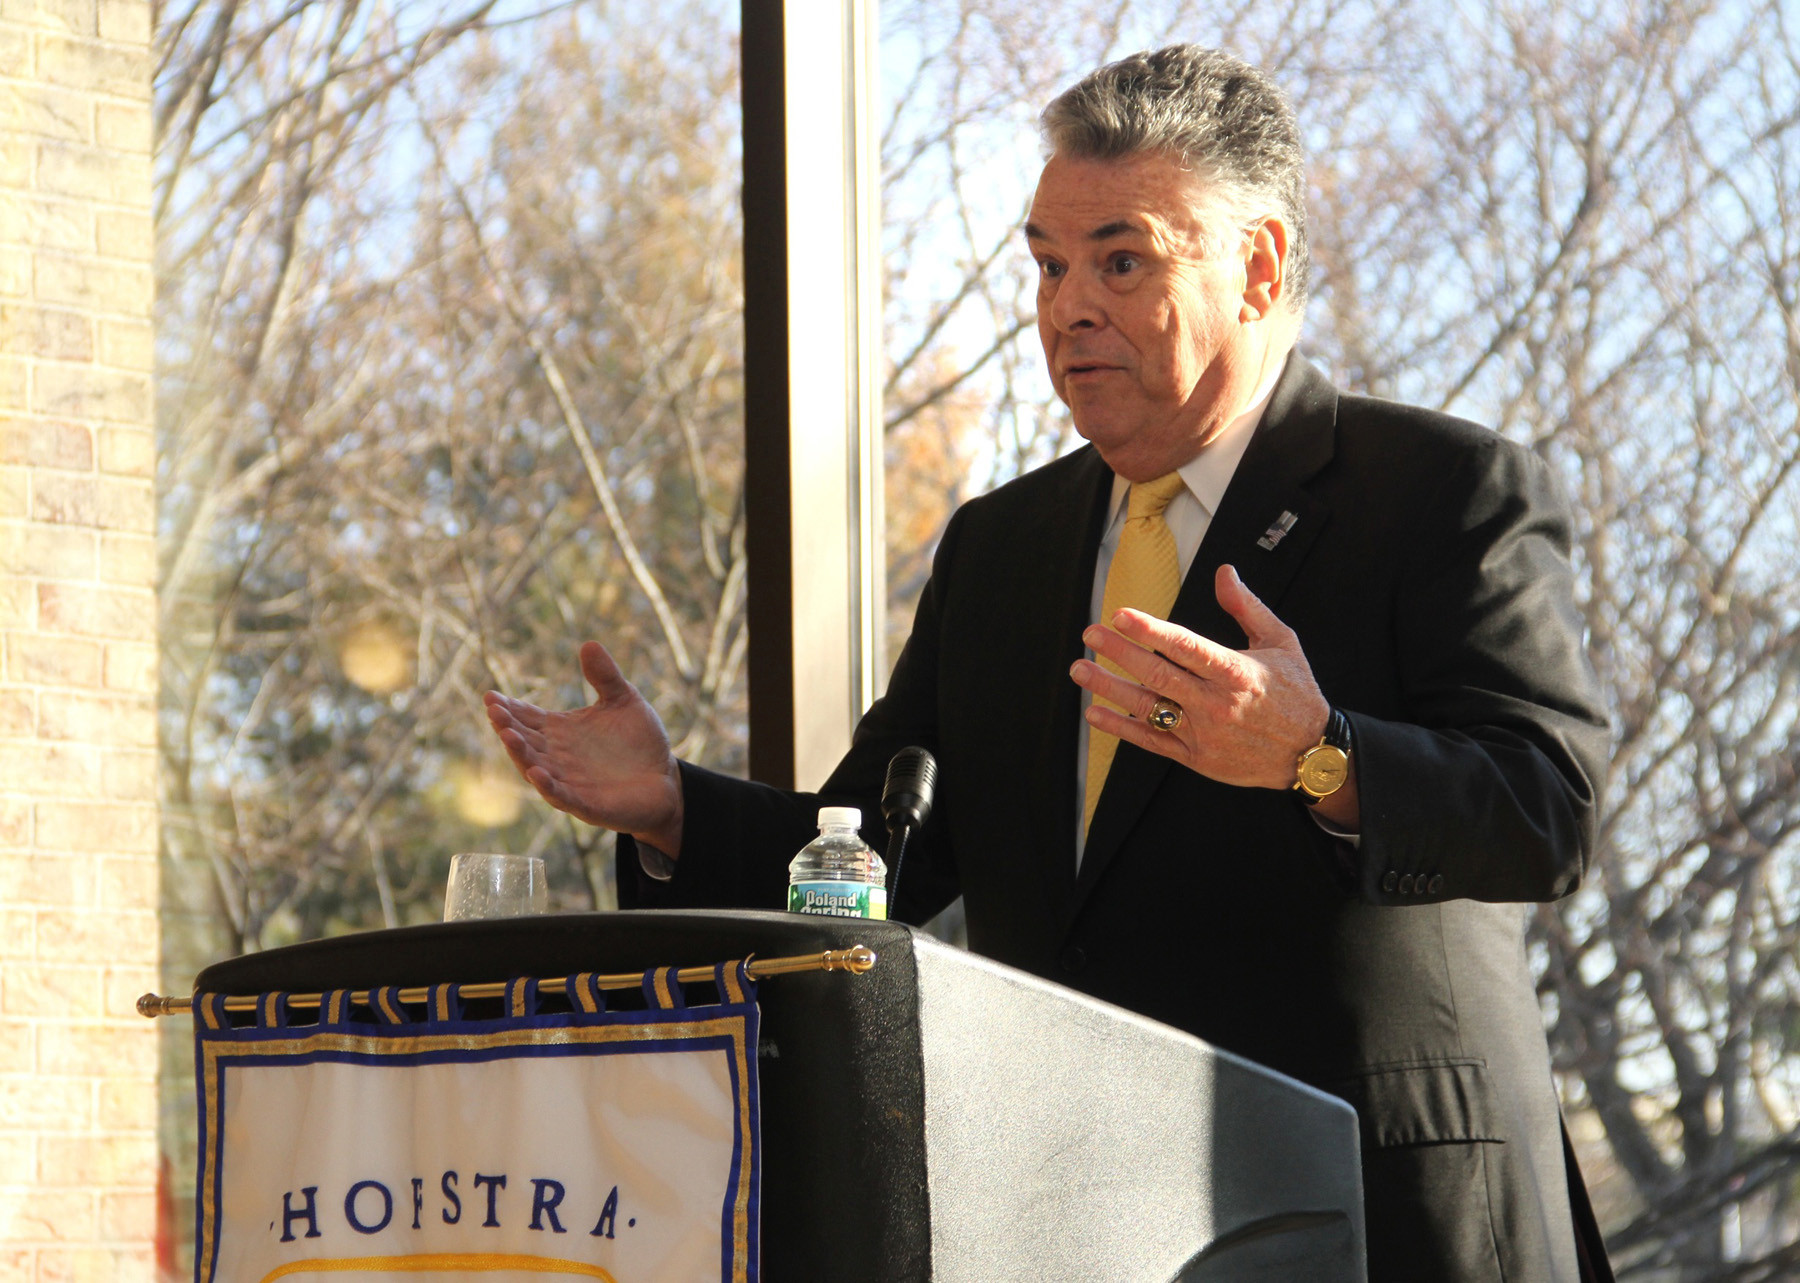 Congressman  Peter King, the keynote speaker at Hofstra University, told the audience that the 11-week delay in Congress set the hurricane reimbursement process back 
“significantly.”